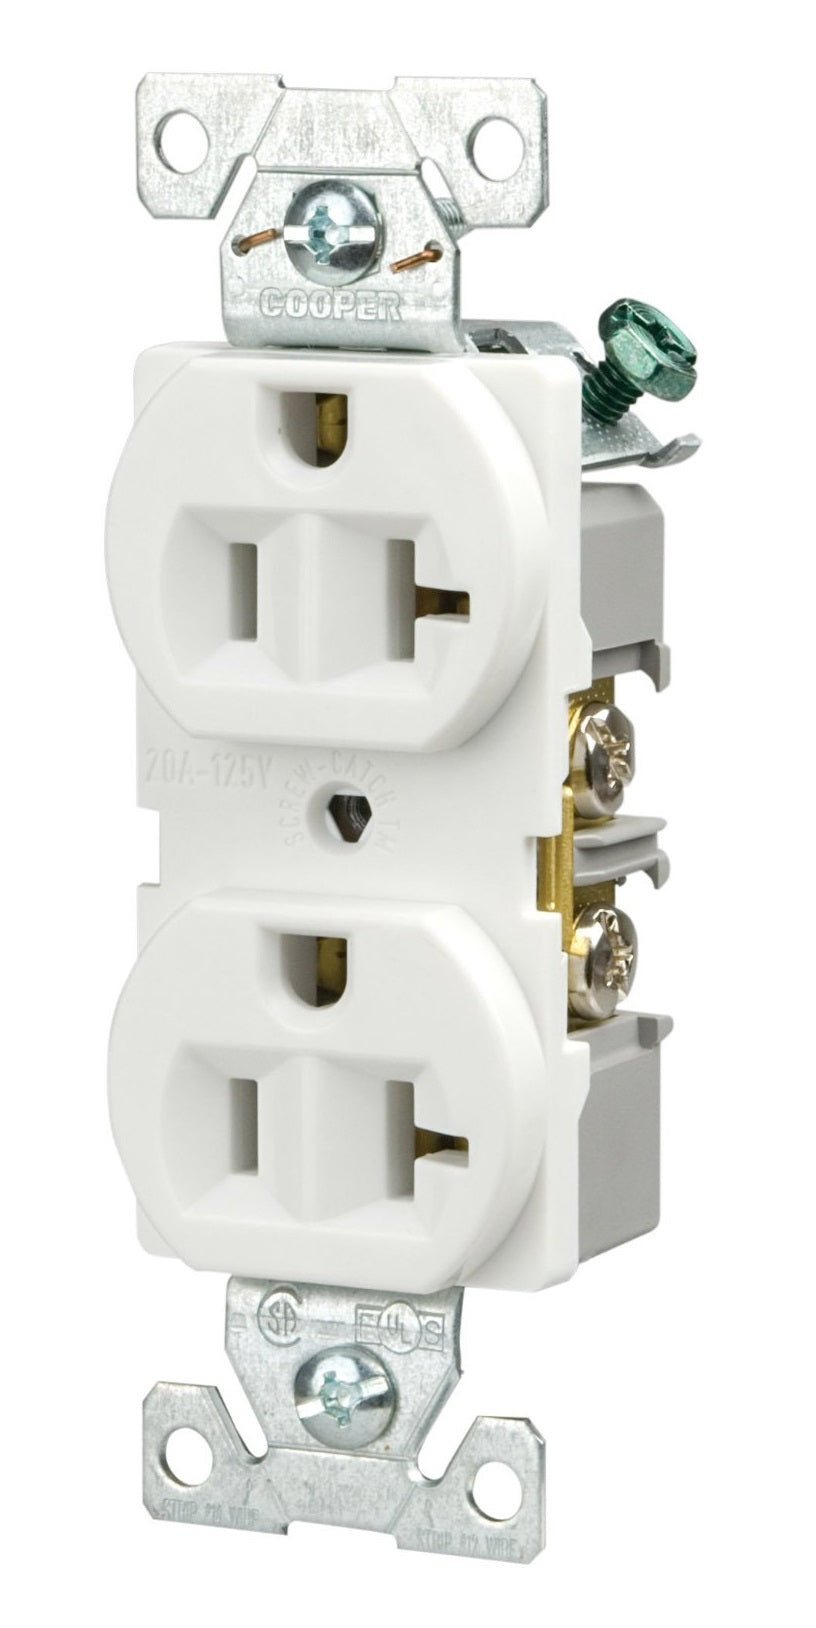 buy electrical switches & receptacles at cheap rate in bulk. wholesale & retail hardware electrical supplies store. home décor ideas, maintenance, repair replacement parts